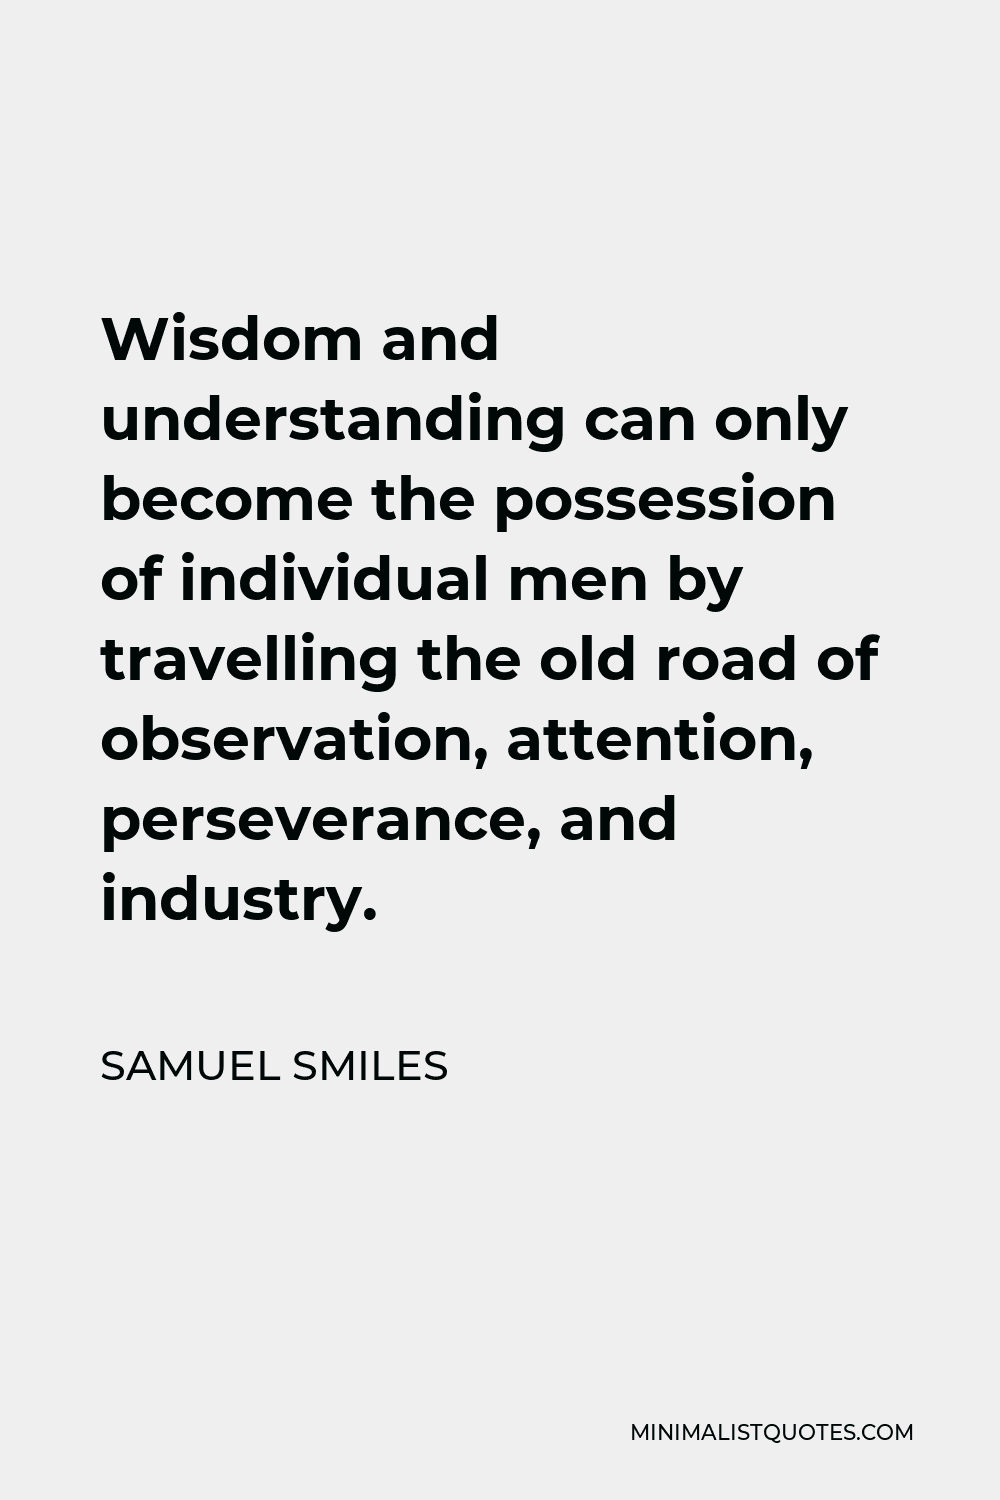 Samuel Smiles Quote - Wisdom and understanding can only become the possession of individual men by travelling the old road of observation, attention, perseverance, and industry.